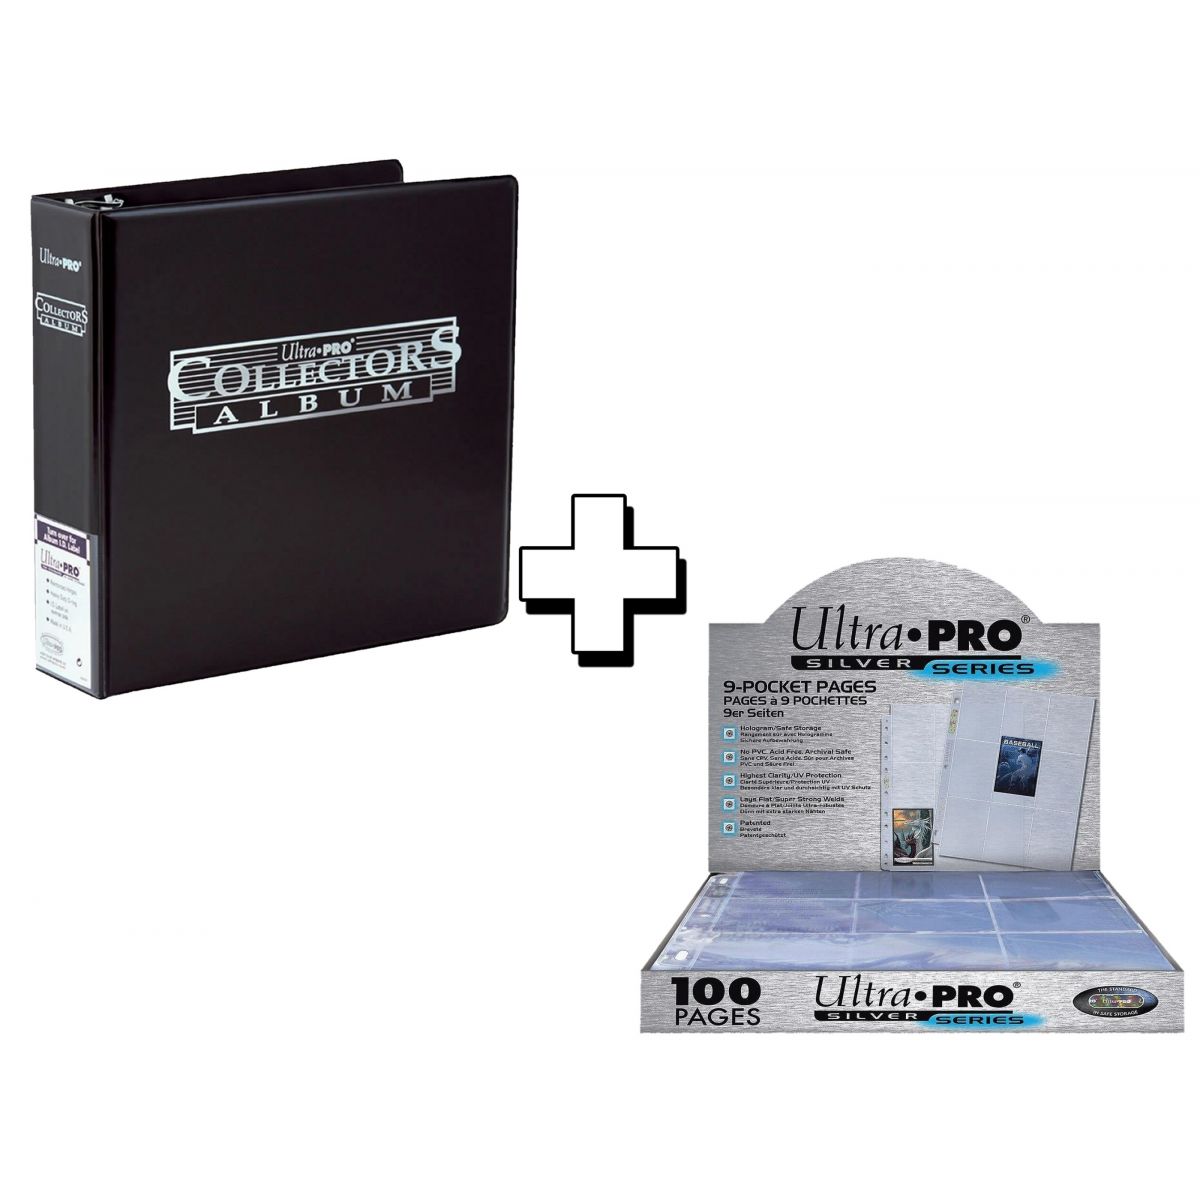 Item Ultra Pro - Pack - Collectors Ring Binder Album Black + 100 Pages Silver